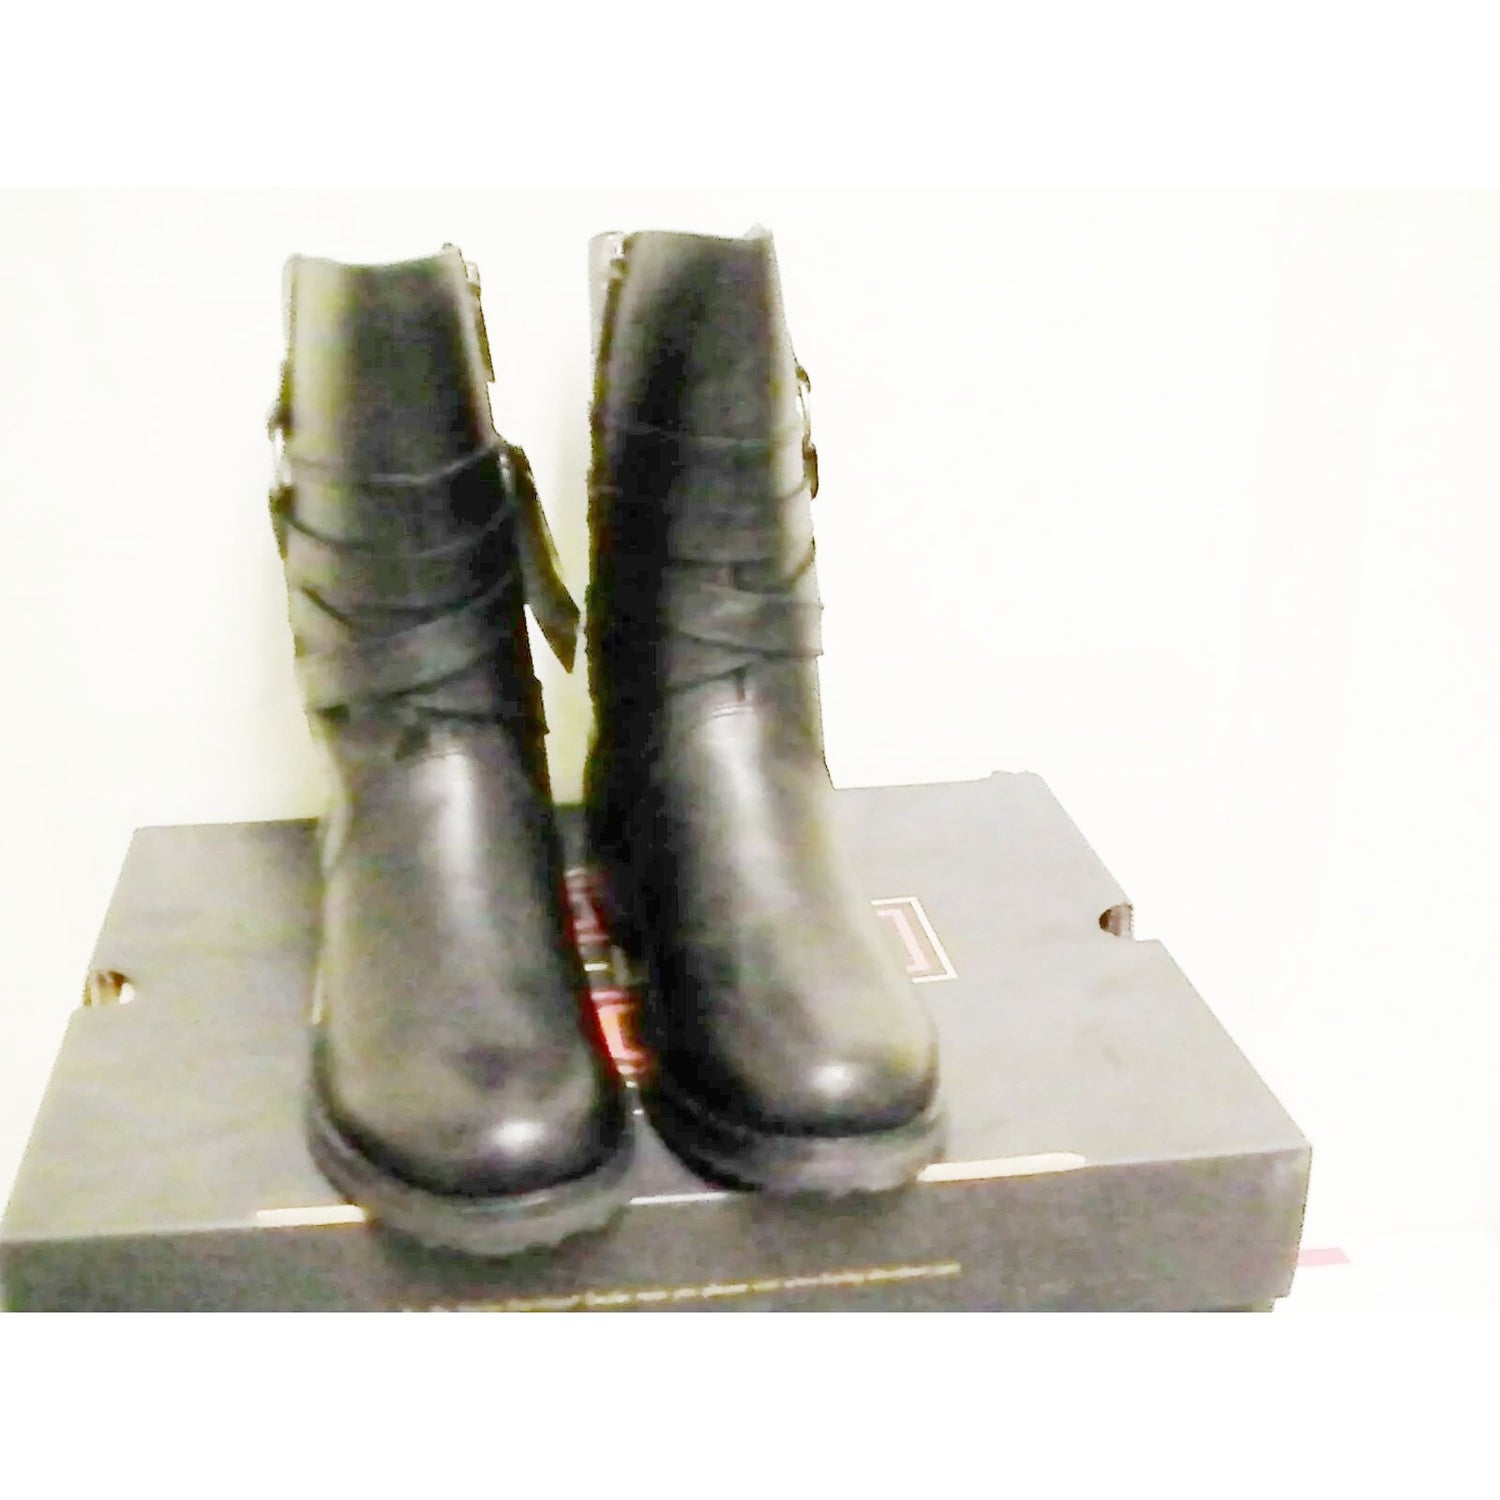 Women's harley davidson riding boots nora riding boots size 7 new with box - Classic Fashion DealsWomen's harley davidson riding boots nora riding boots size 7 new with boxHarley-DavidsonClassic Fashion DealsWomen's harley davidson riding boots nora riding boots size 7 new with box